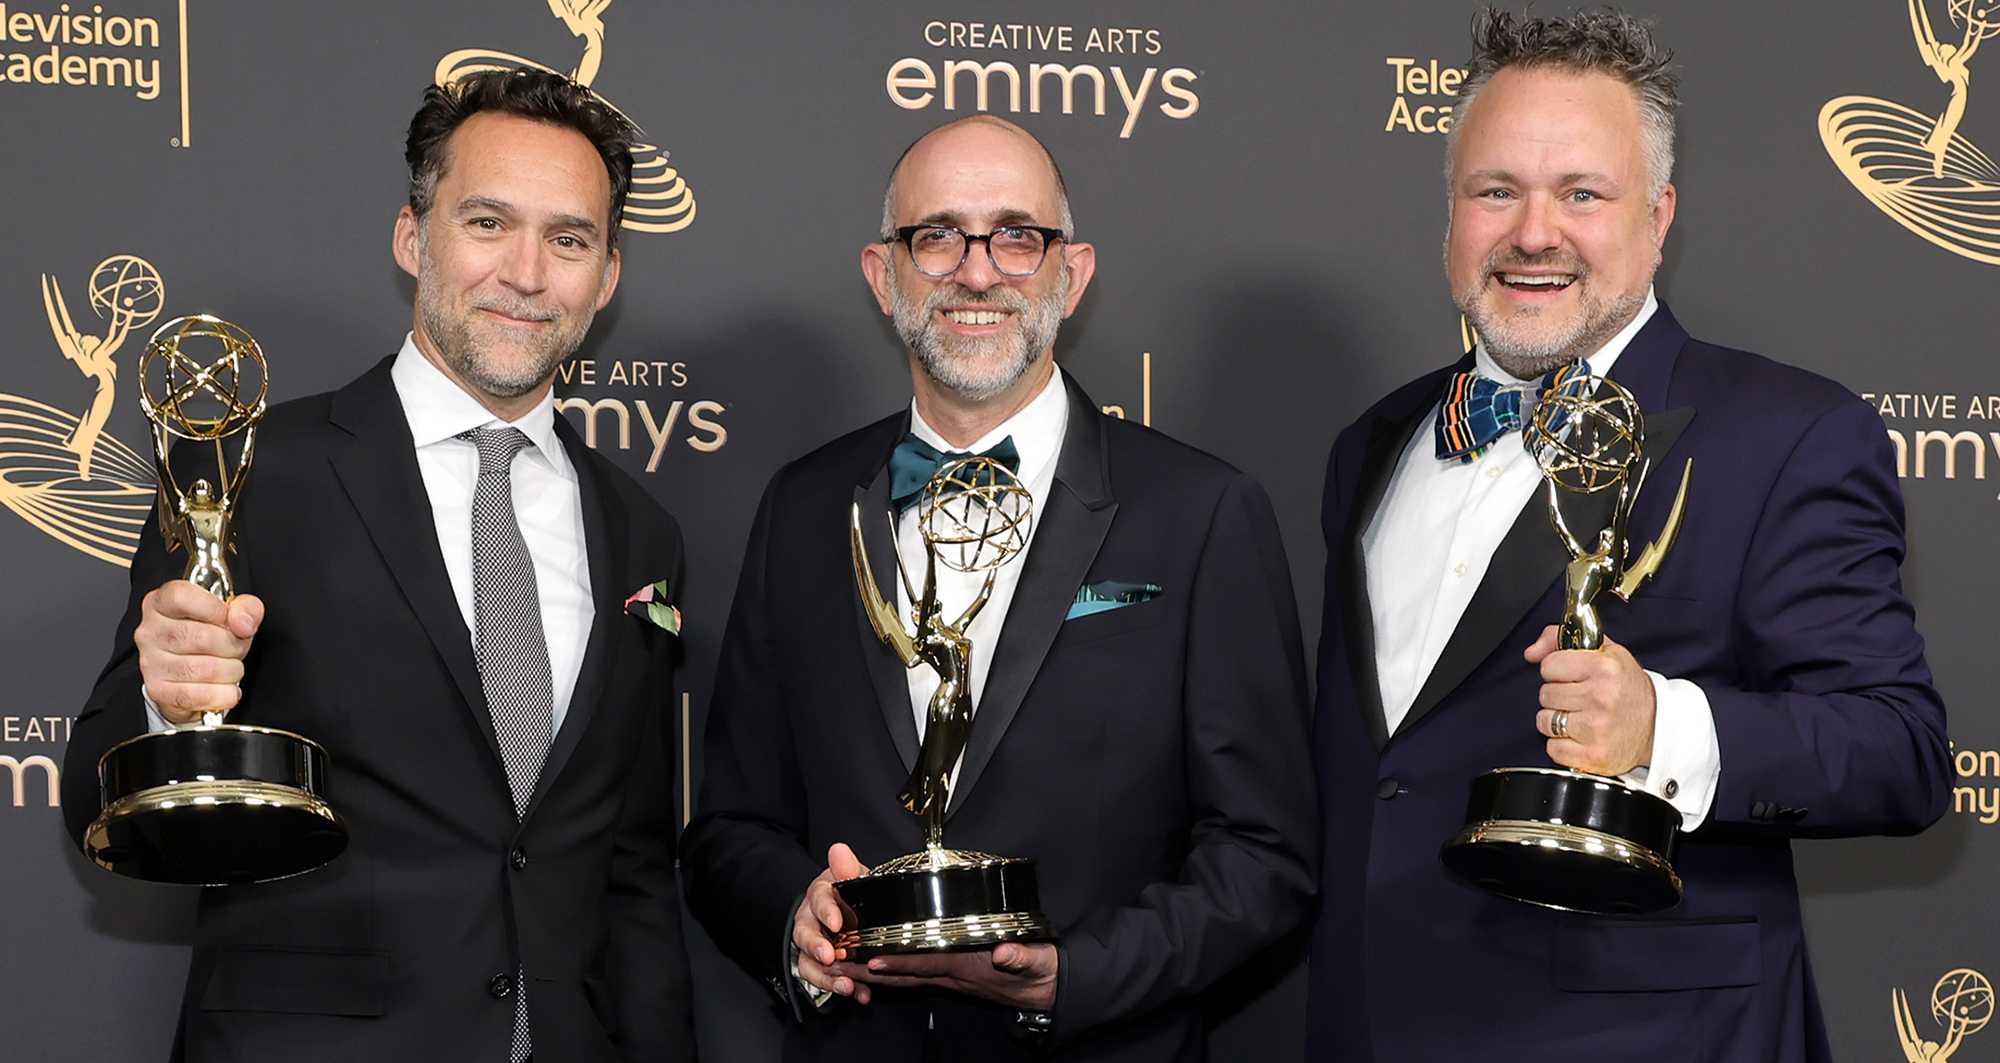 Production designer Curt Beech, art director Jordan Jacobs, and Rich Murray, AB’94, with their Emmys for Only Murders in the Building.